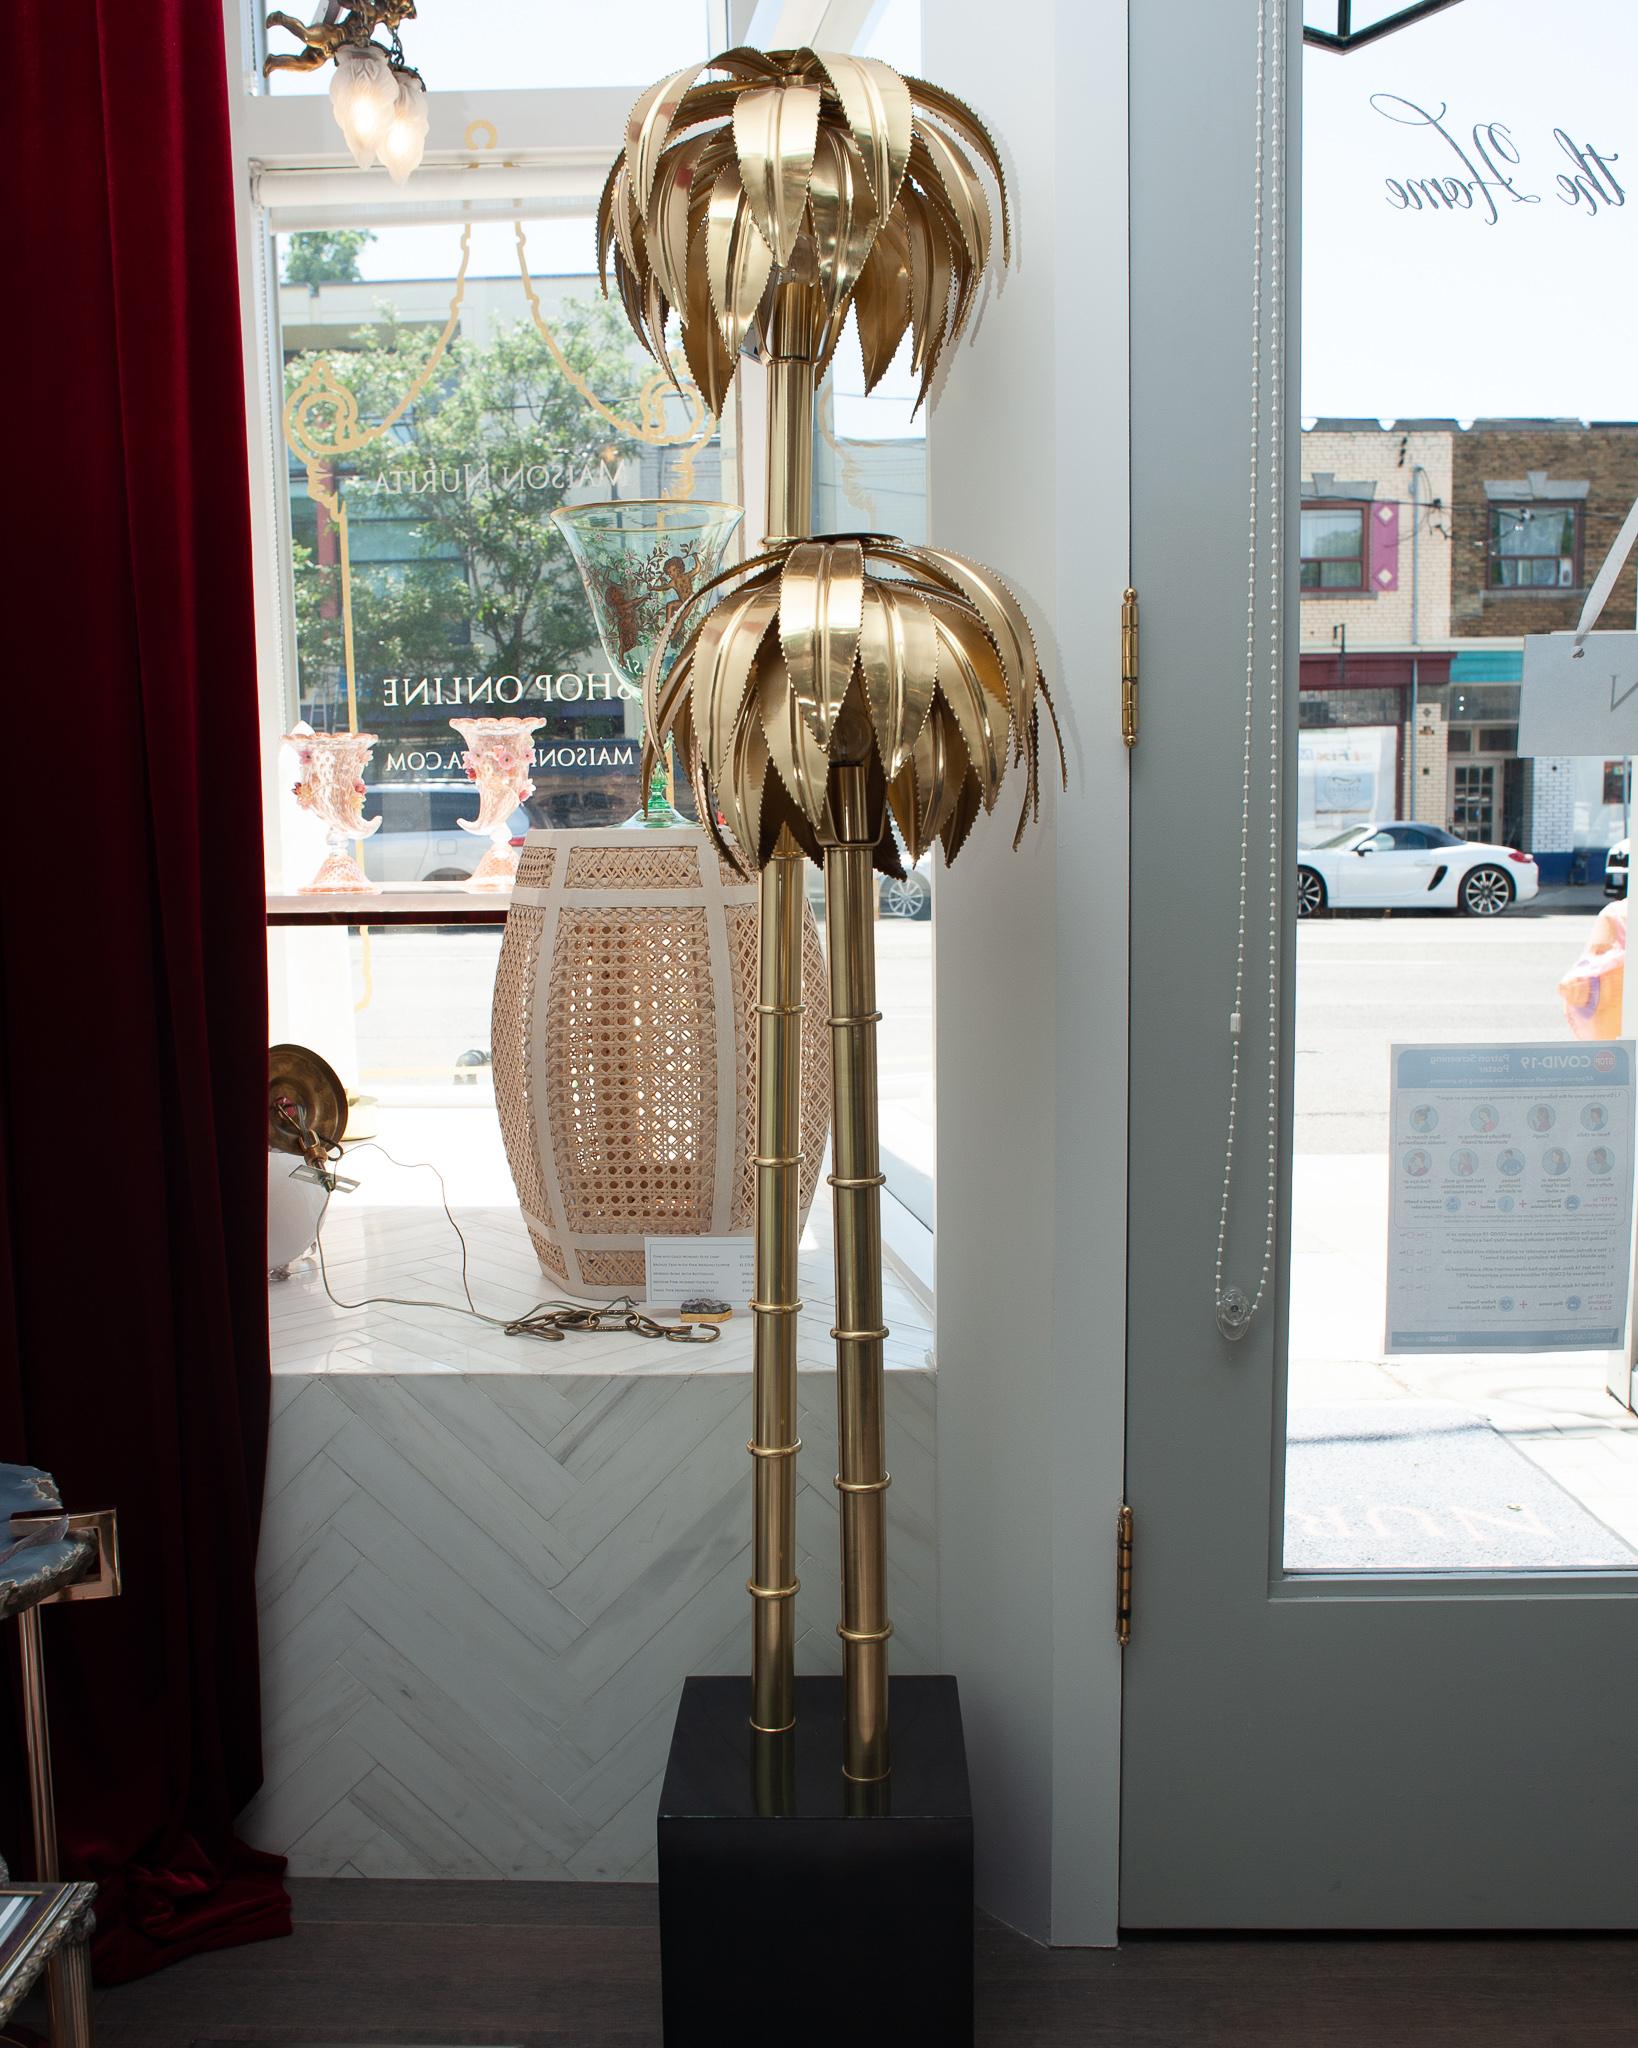 Unable to visit Miami, this beautifully made metal mid-century inspired palm lamp will bring Miami to you. One of our favourite cities, Miami is known for its rich Art Deco history. Constructed entirely by hand in brass, these lamps will add